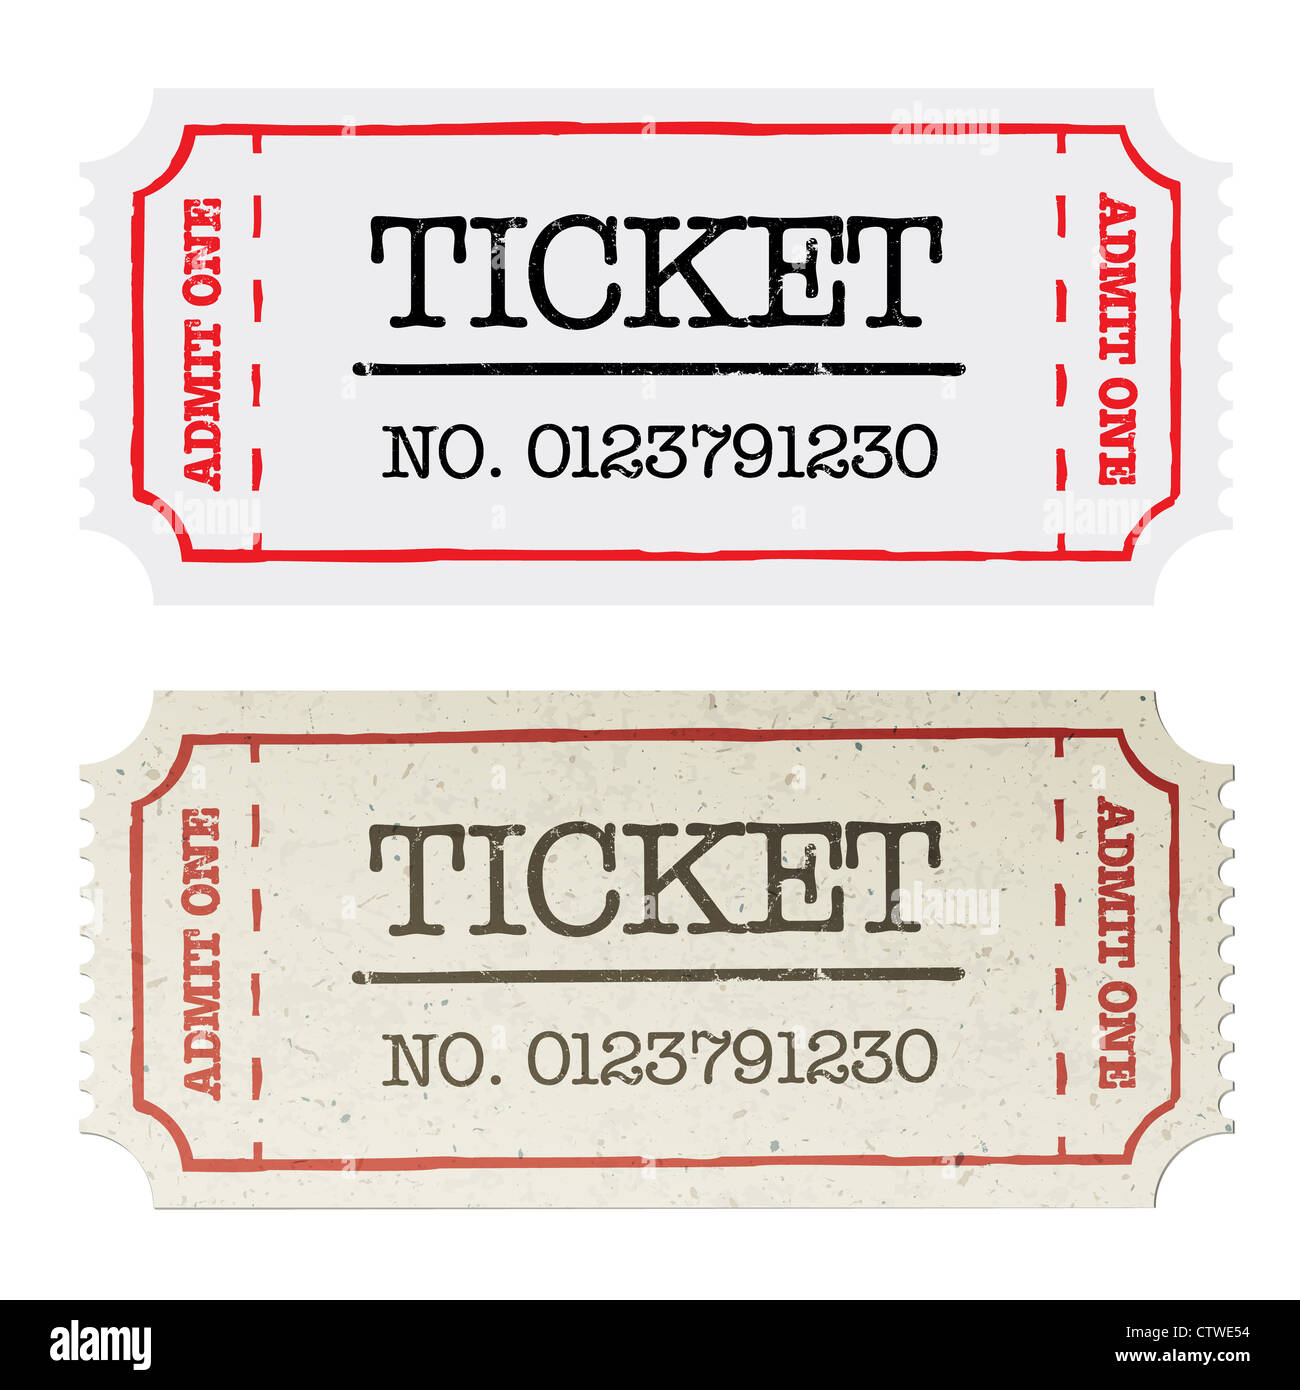 Vintage paper ticket, two versions Stock Photo